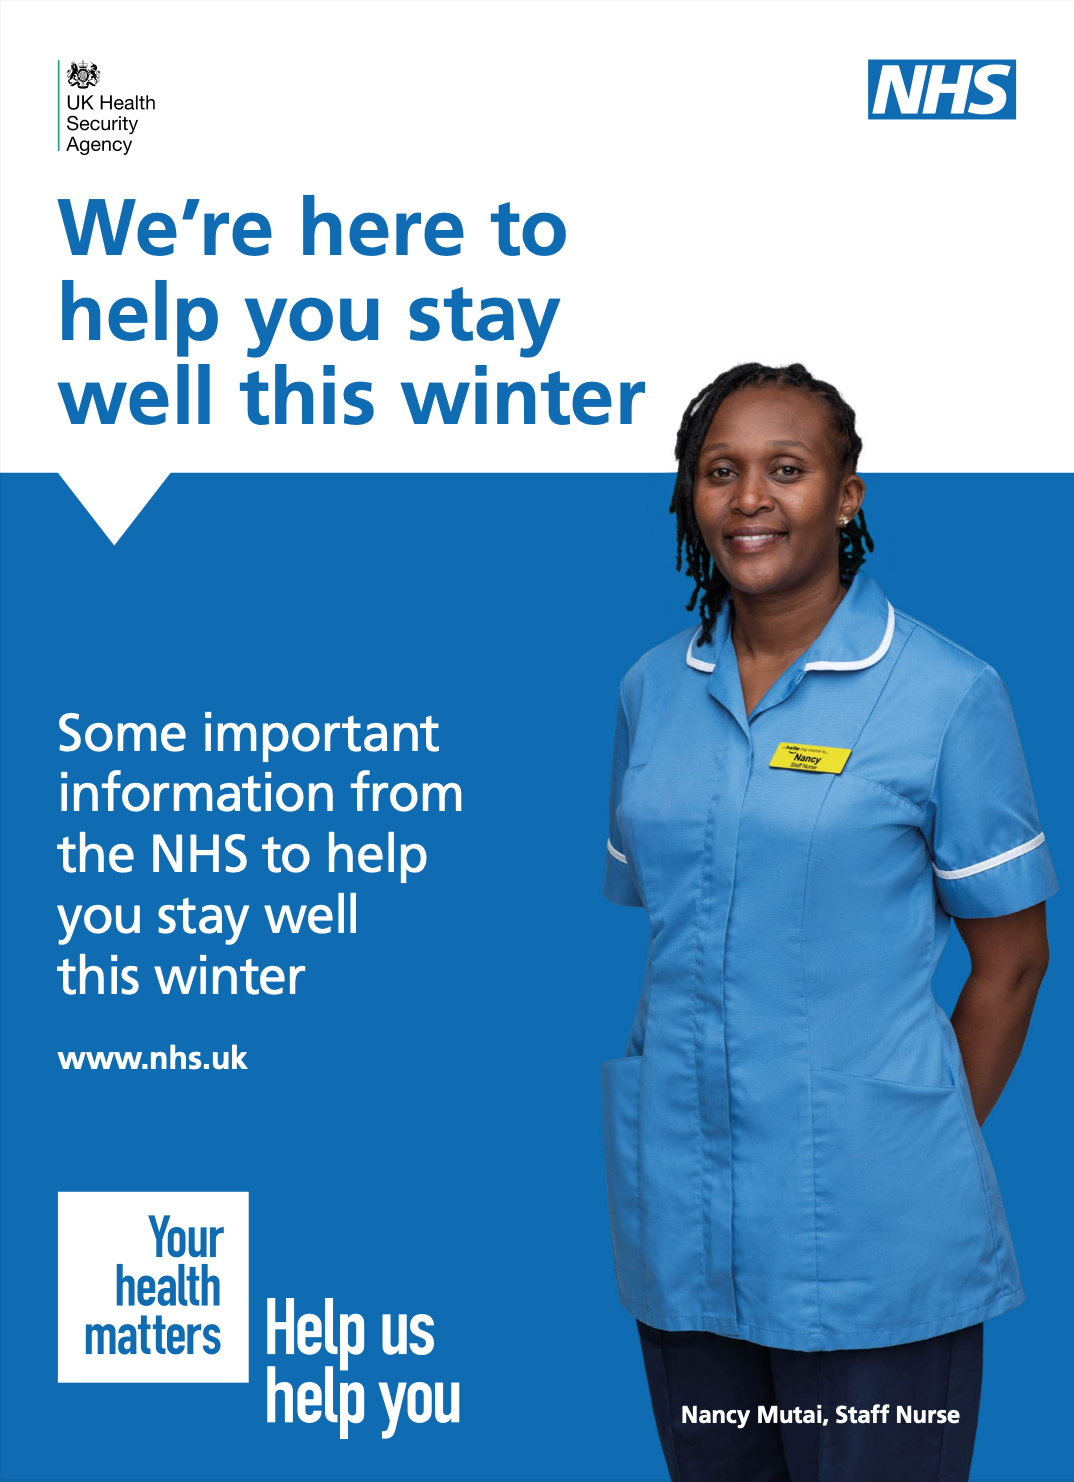 The front page of the Stay Well this Winter flyer